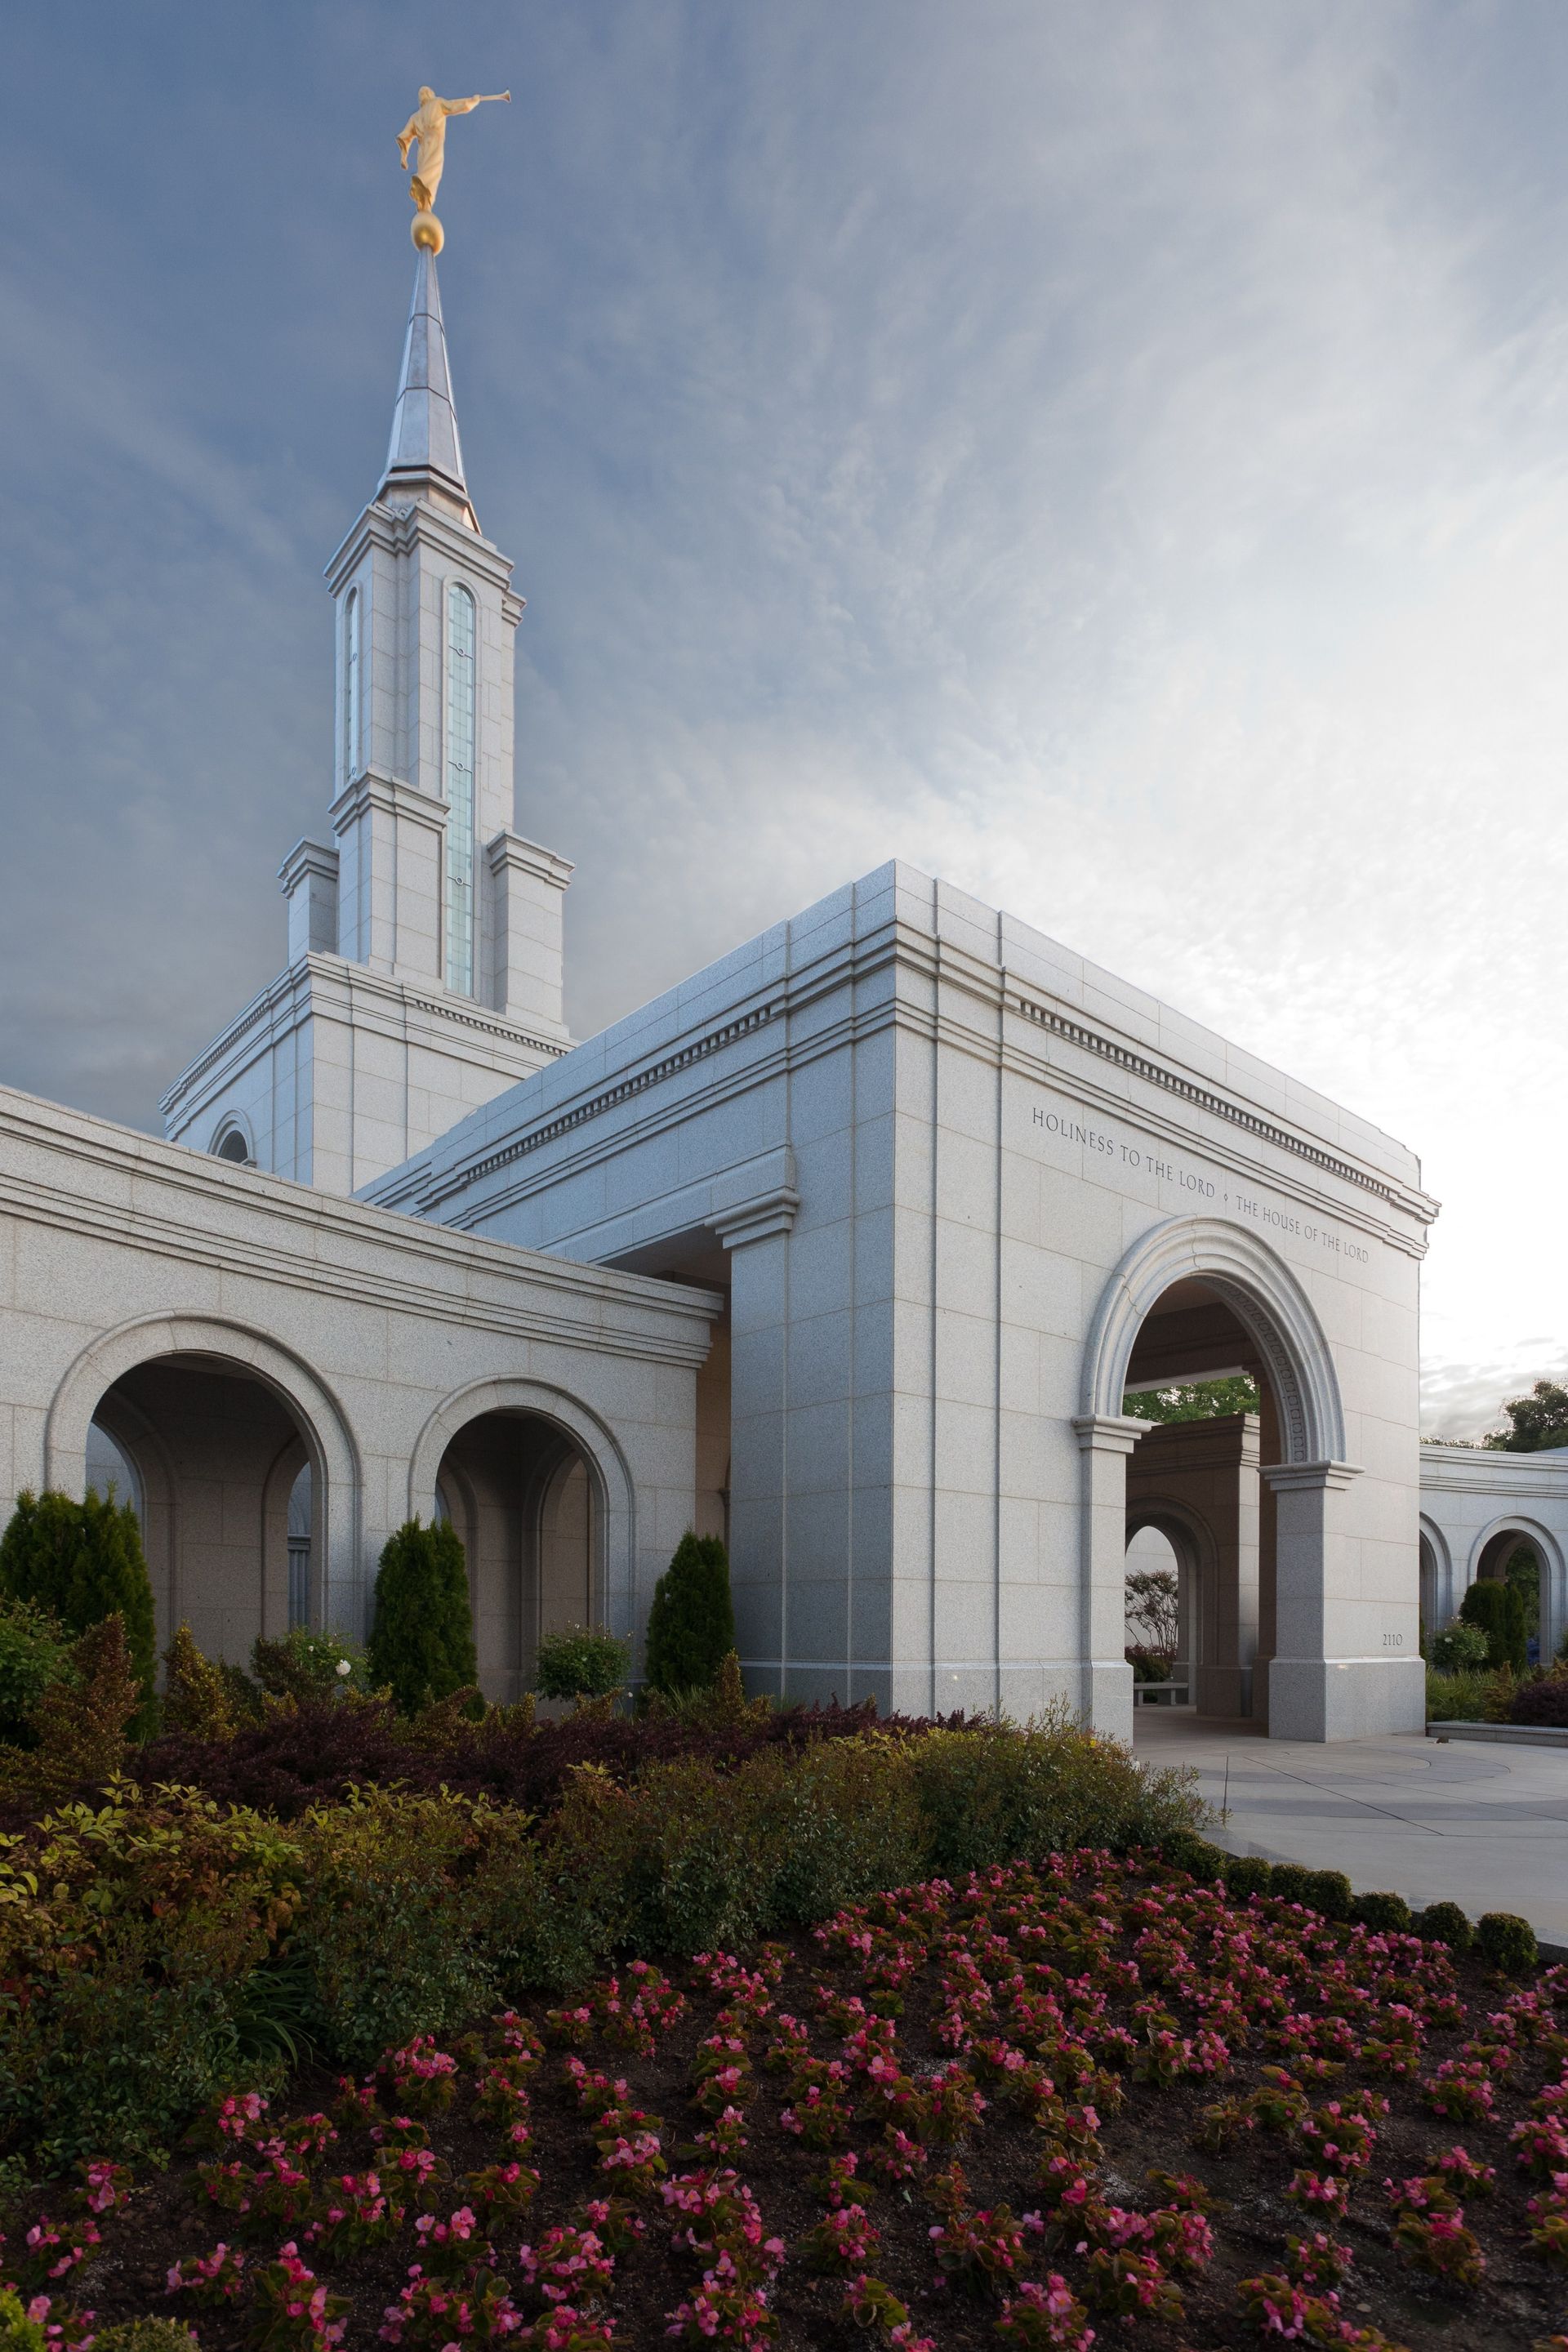 The Sacramento California Temple entrance, including the scenery and spire.